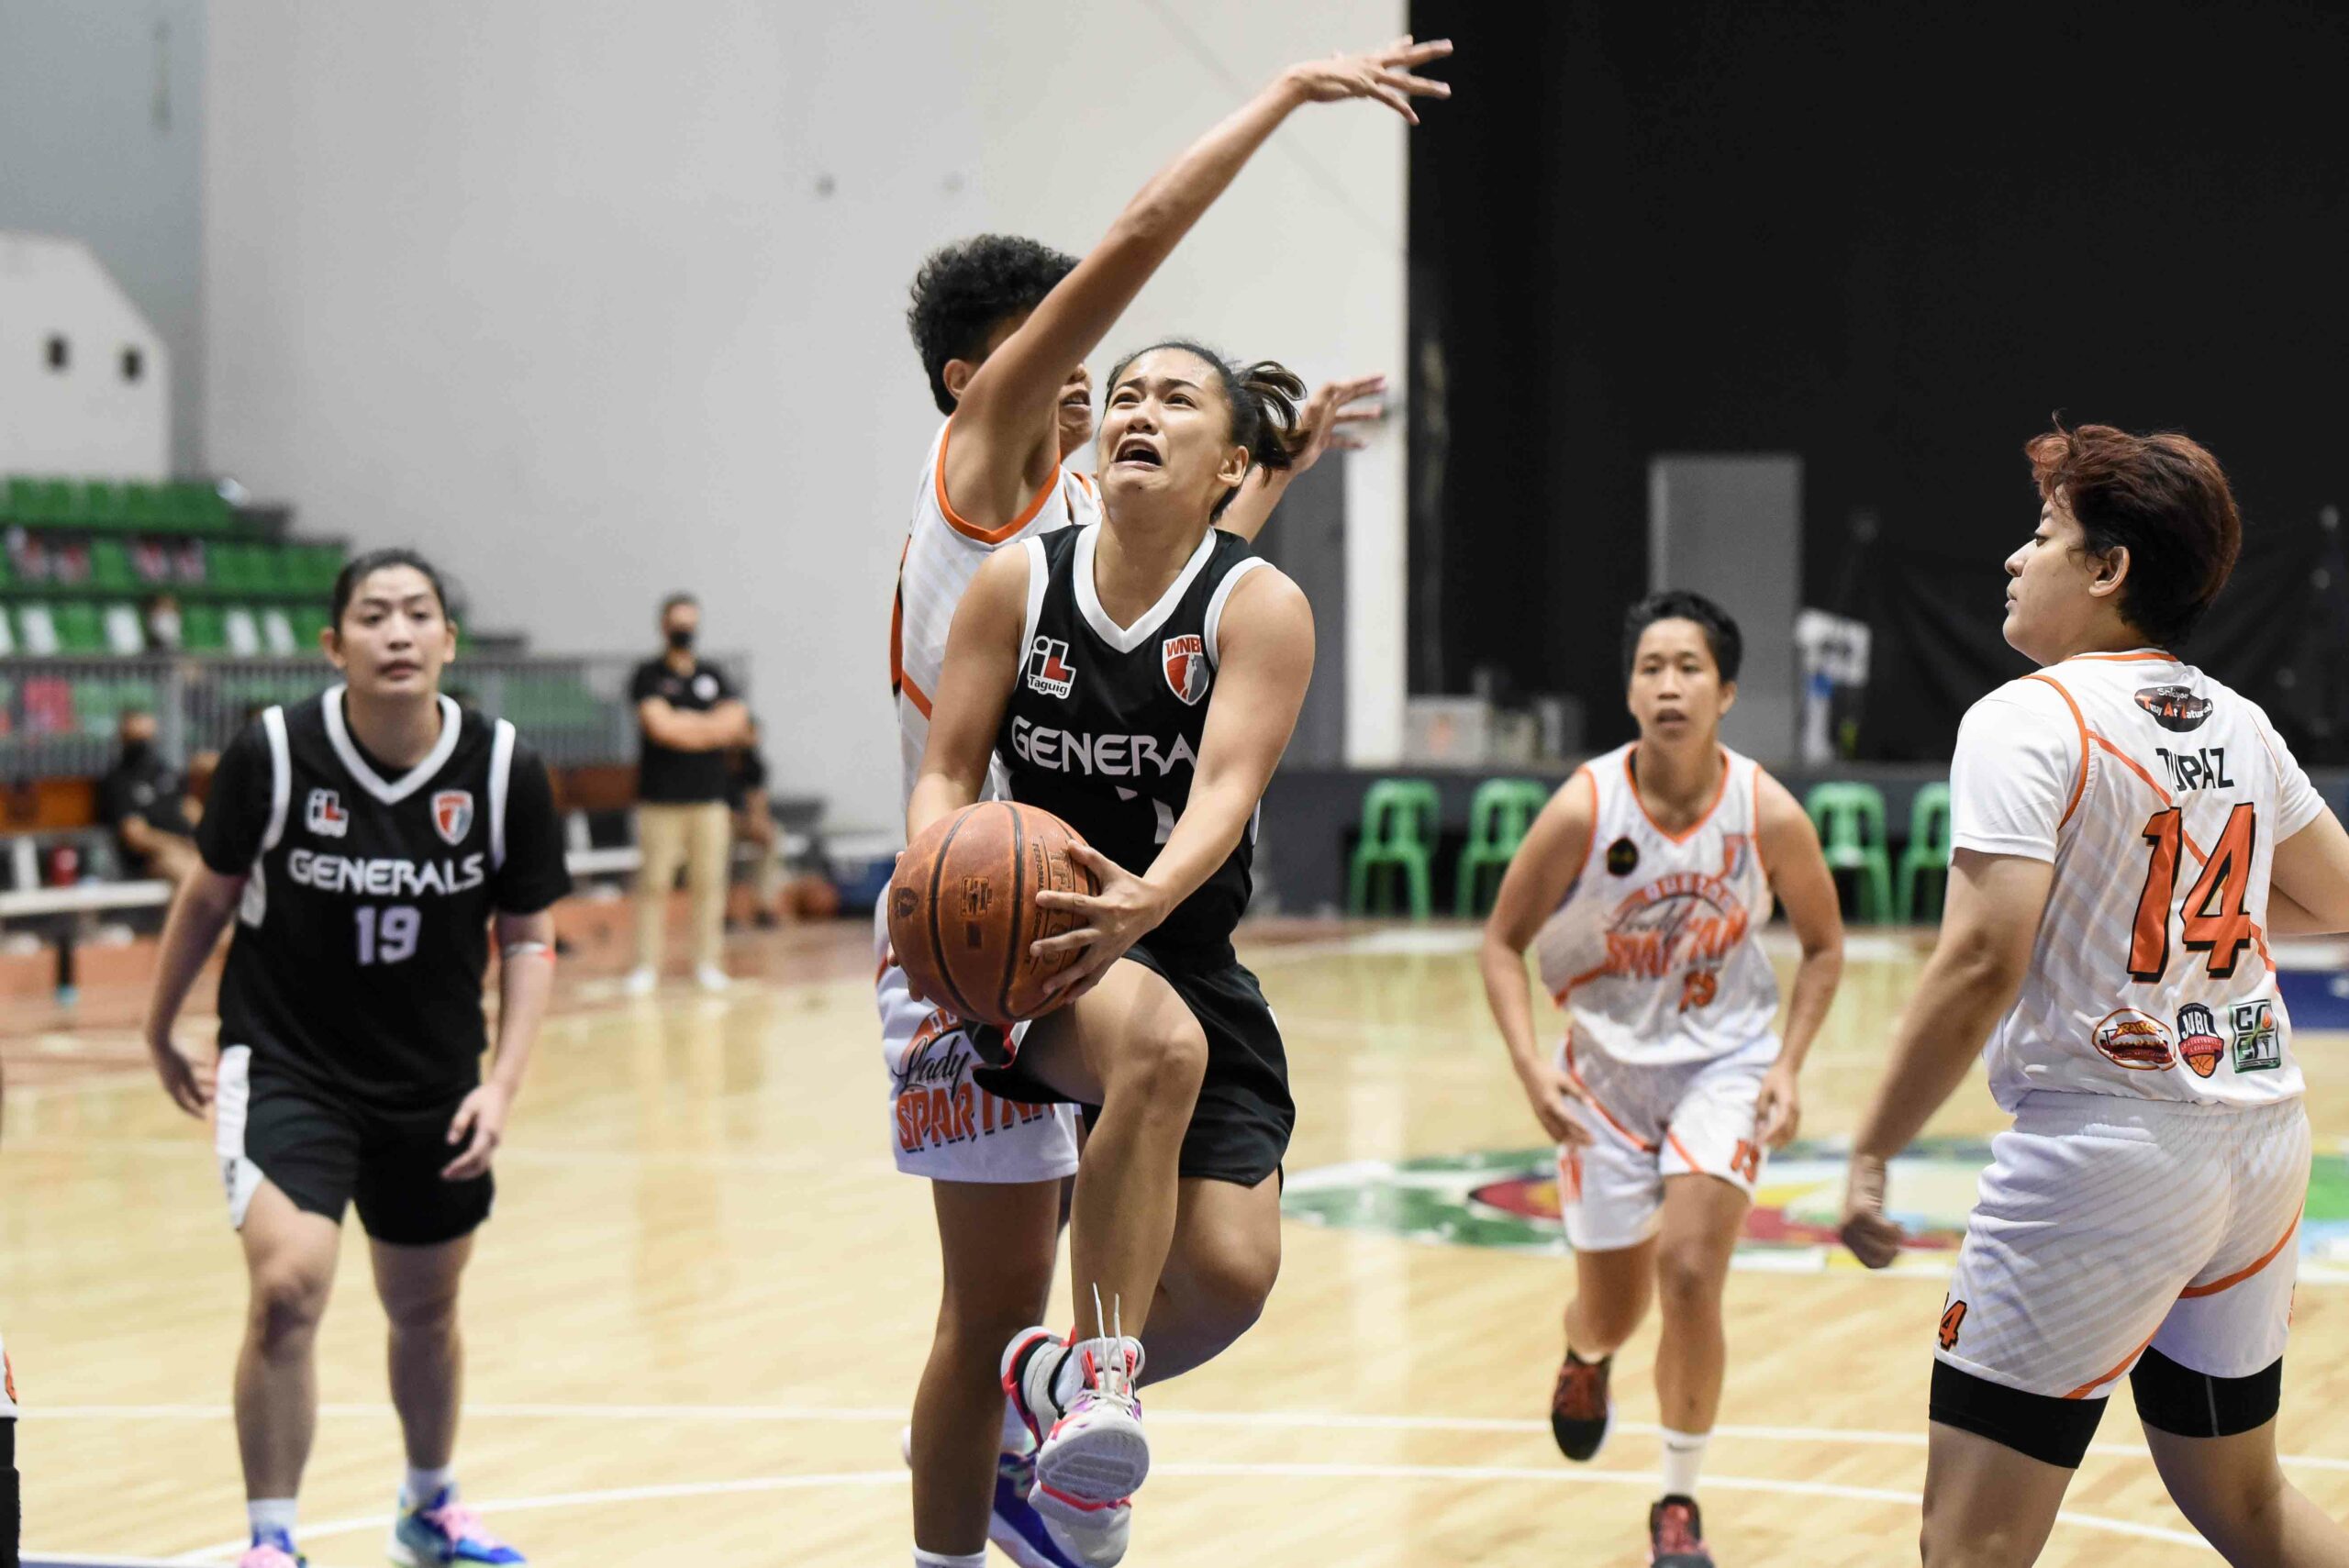 2021-Pia-WNBL-Quezon-vs-Taguig-Janeth-Sison-scaled Capilit shuts door on Stan Quezon as Taguig scores bounce back WNBL win Basketball NBL News  - philippine sports news